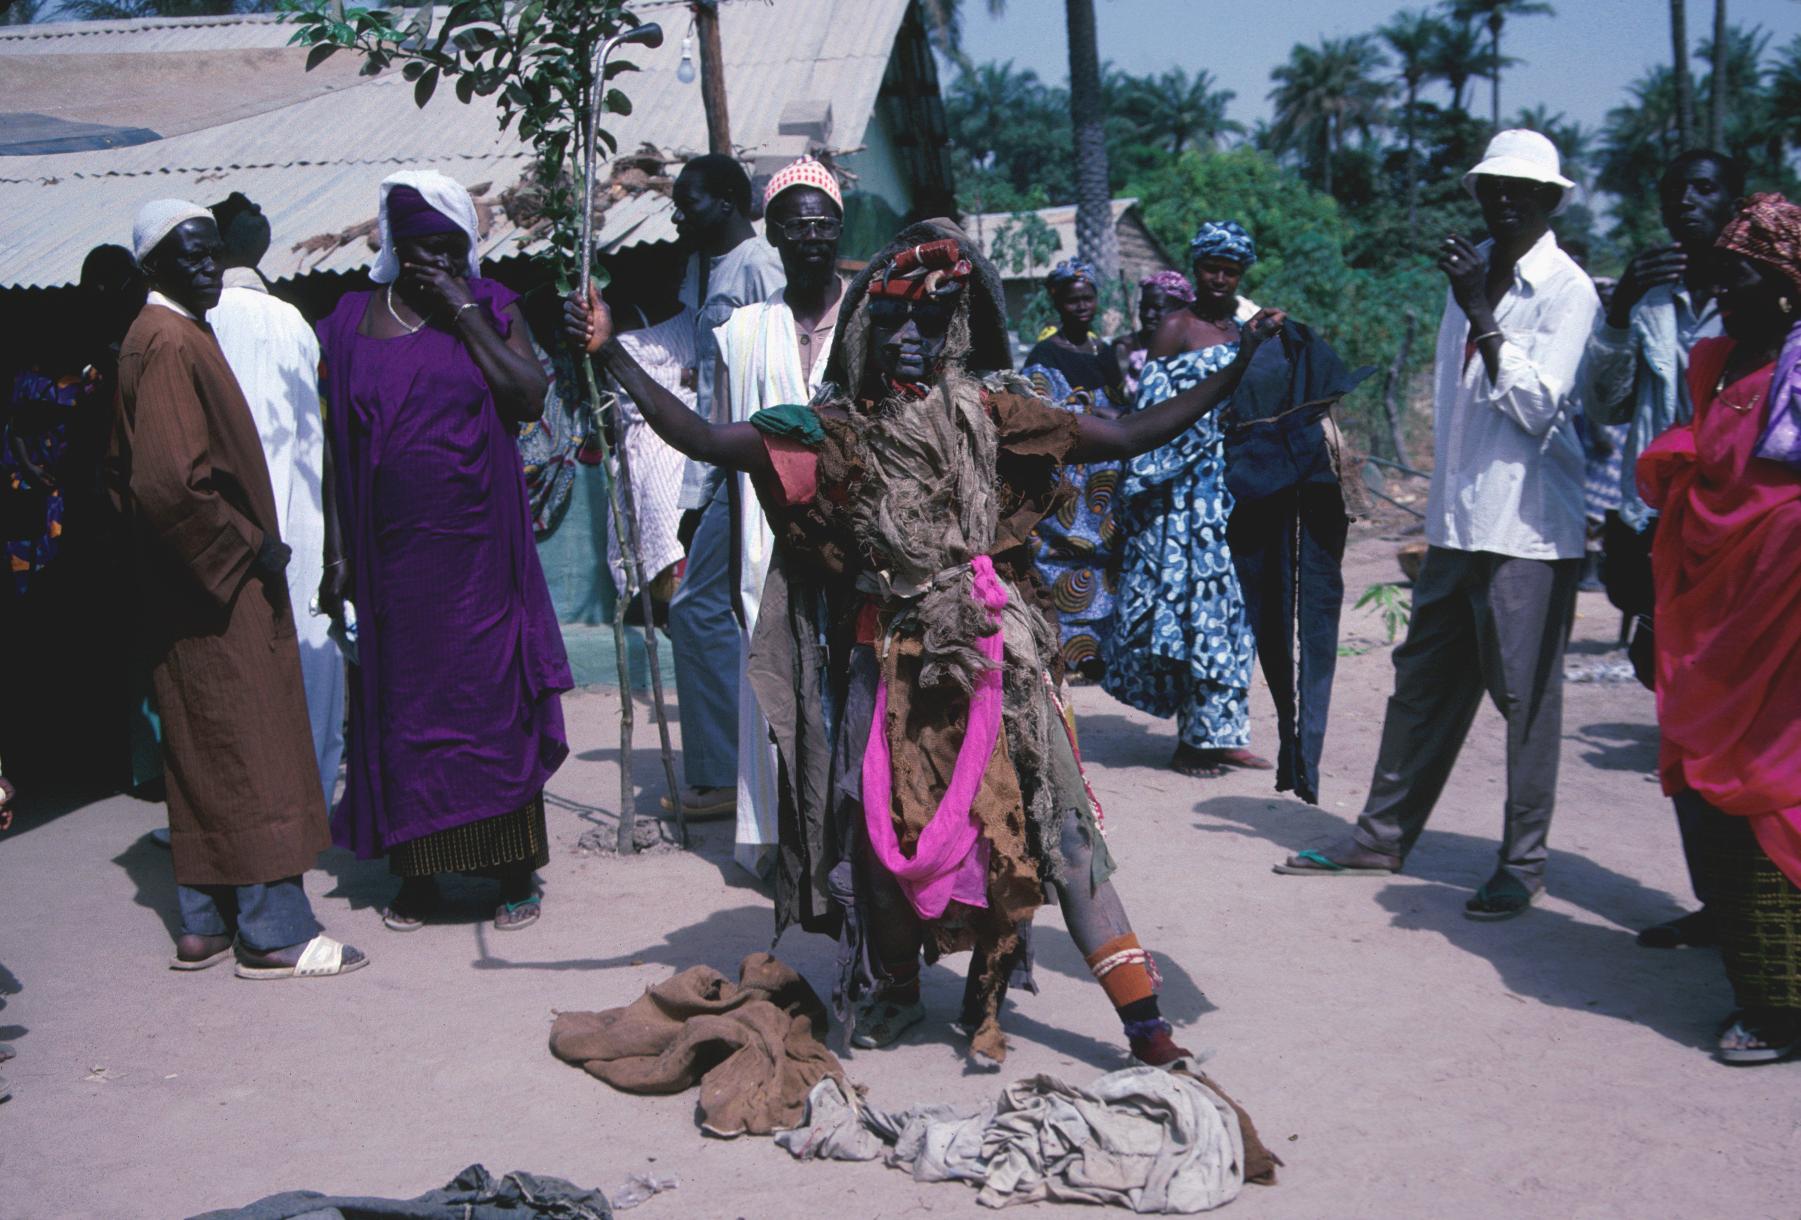 A Female Clown Performing at the Naming Ceremony